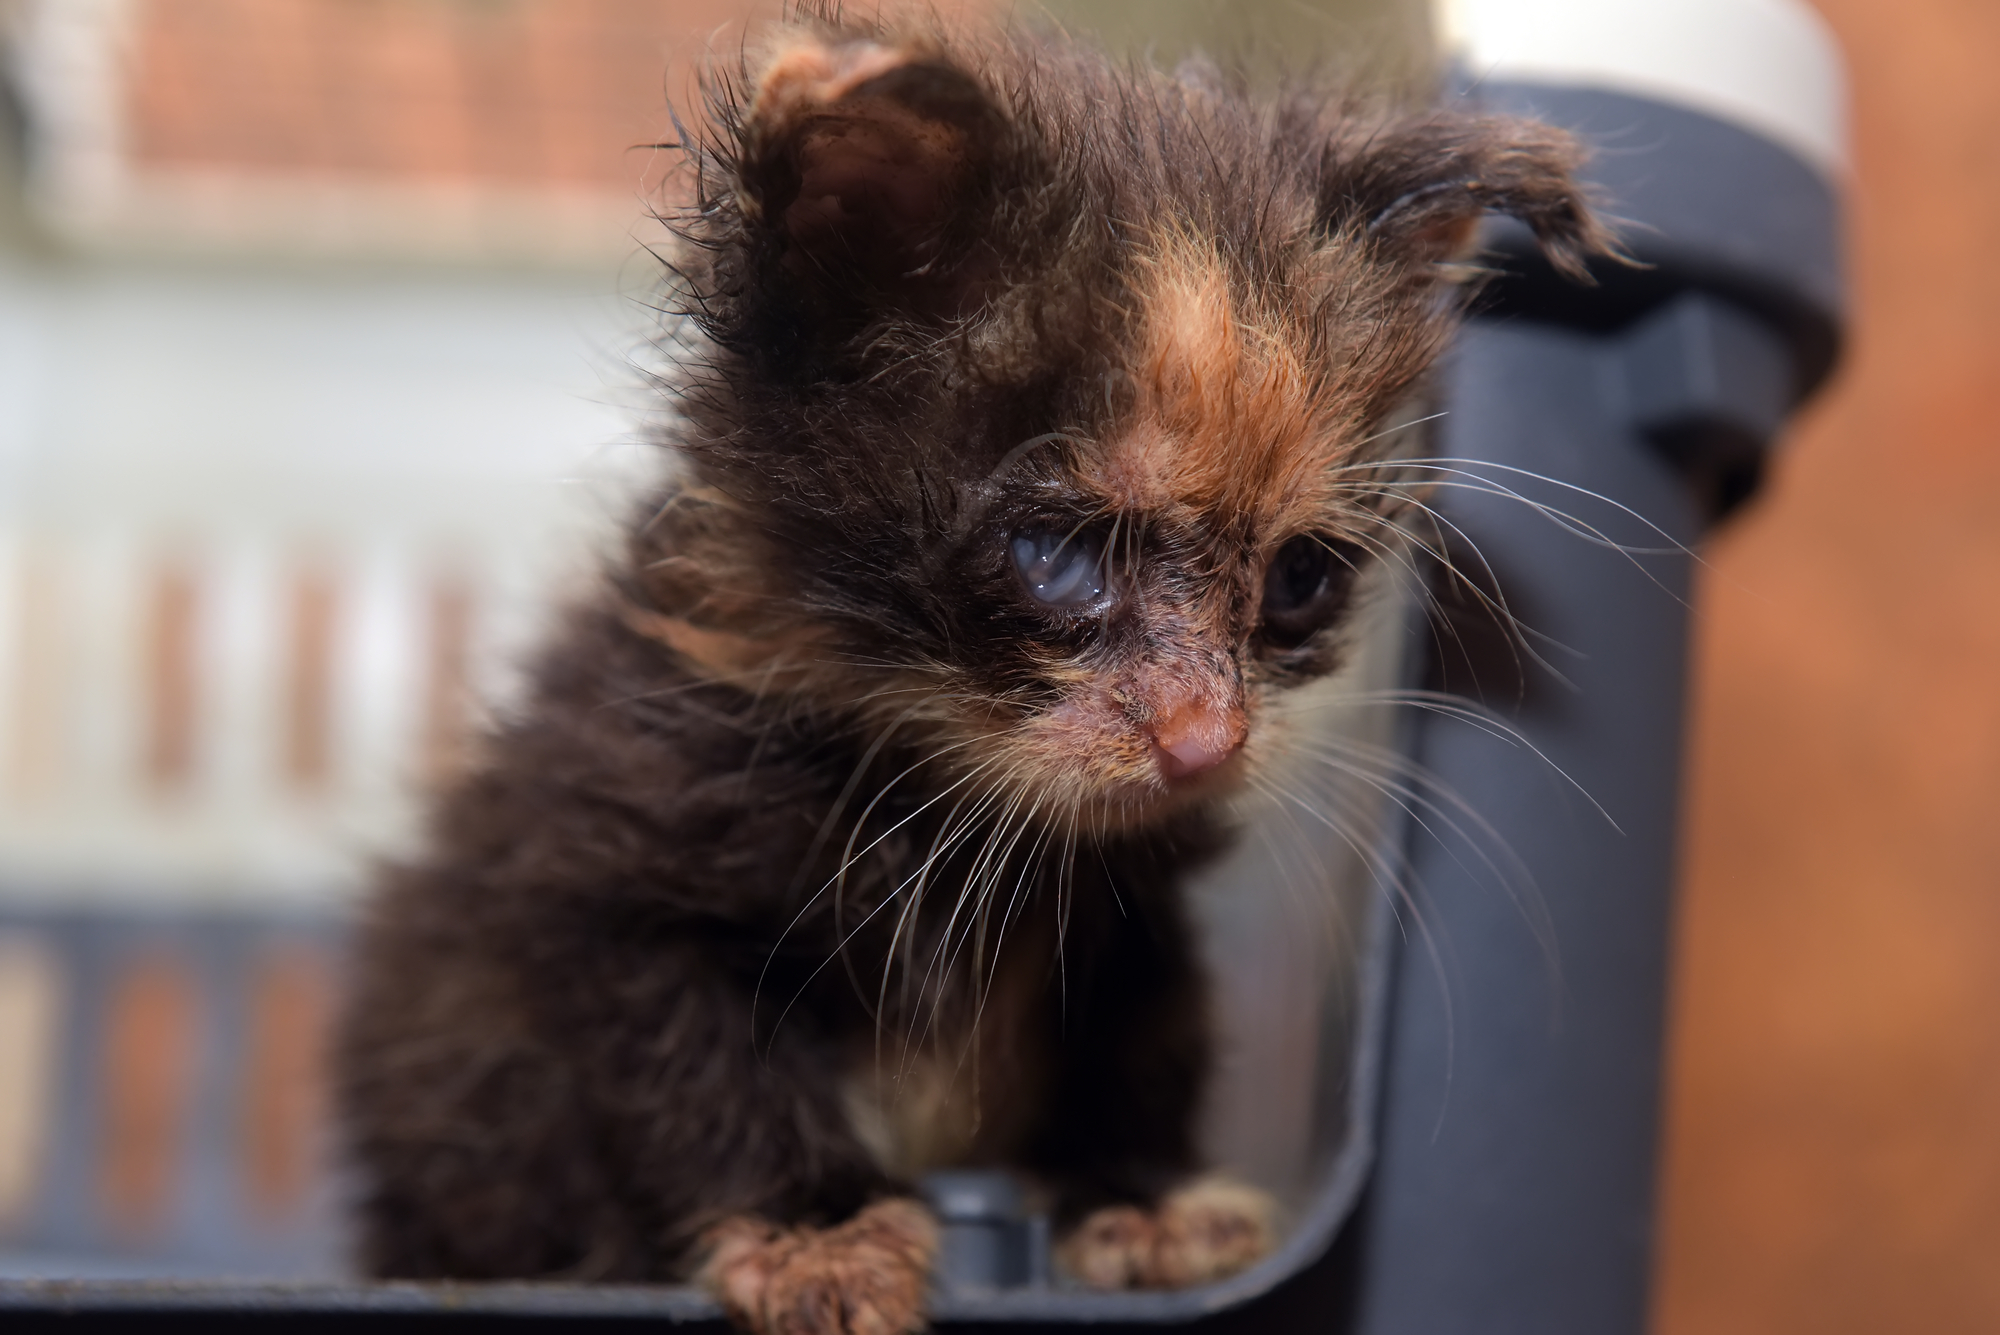 Little dirty kitten with eye disease due to infection in the shelter